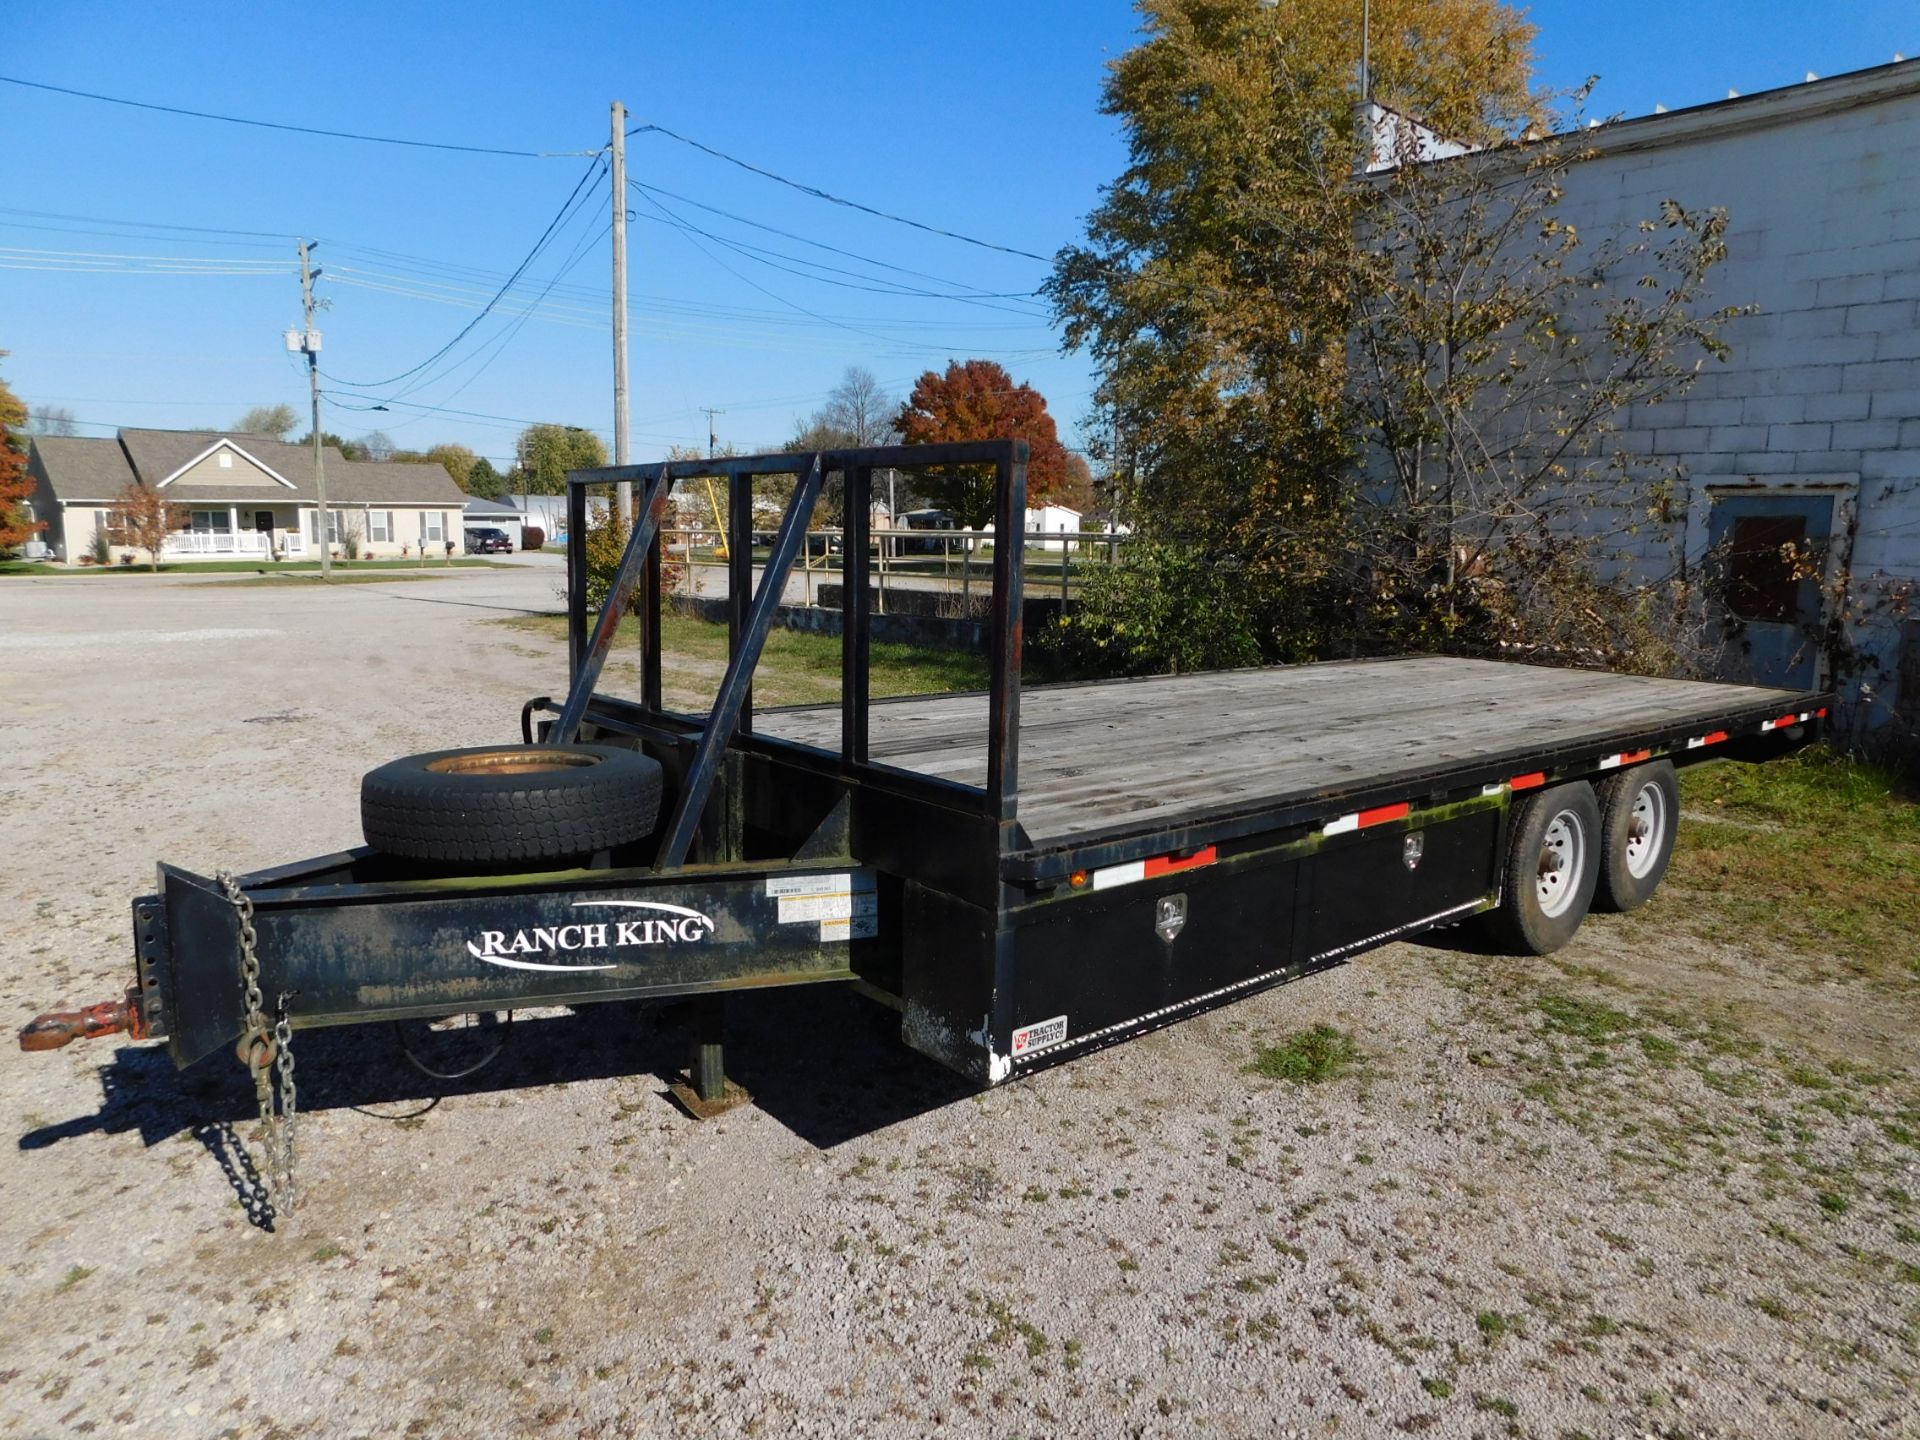 2006 Ranch King 20' Deck Over Flat Bed Trailer, Tandem Axle, 8' 8" Wide, 14,000 lb. GVWR, Tool Box